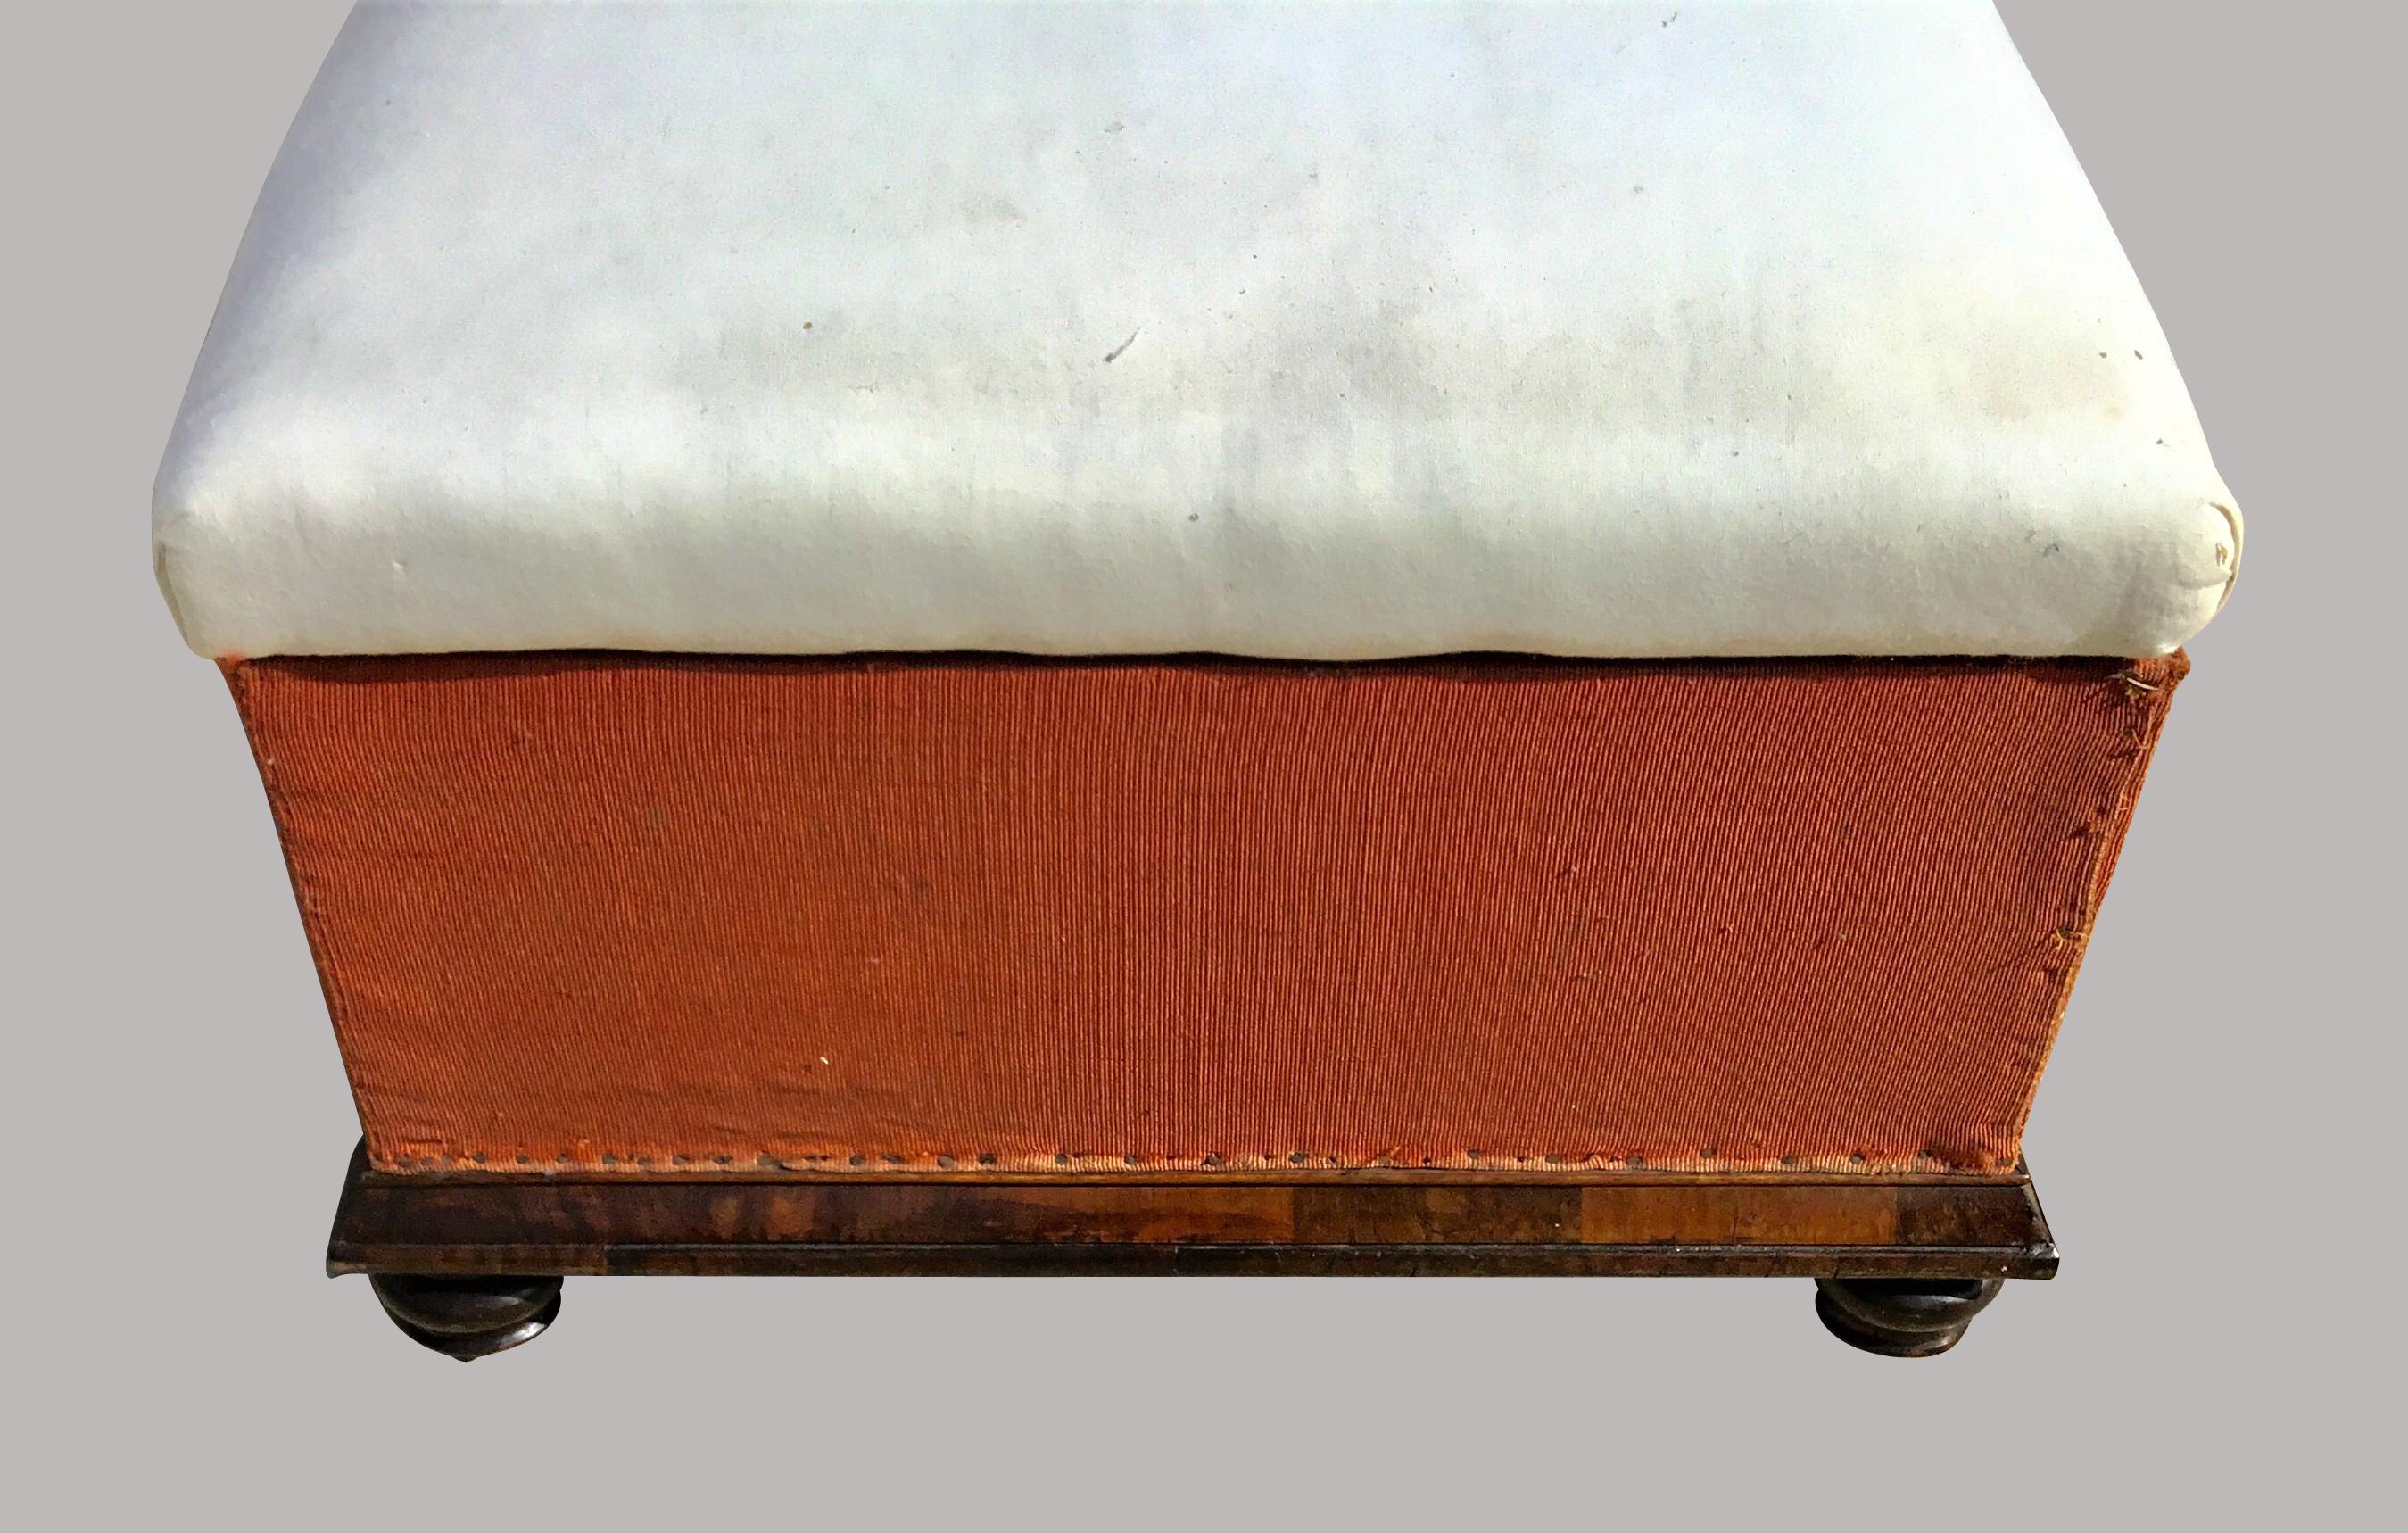 19th Century Large Upholstered Ottoman In Good Condition For Sale In Moreton-in-Marsh, Gloucestershire